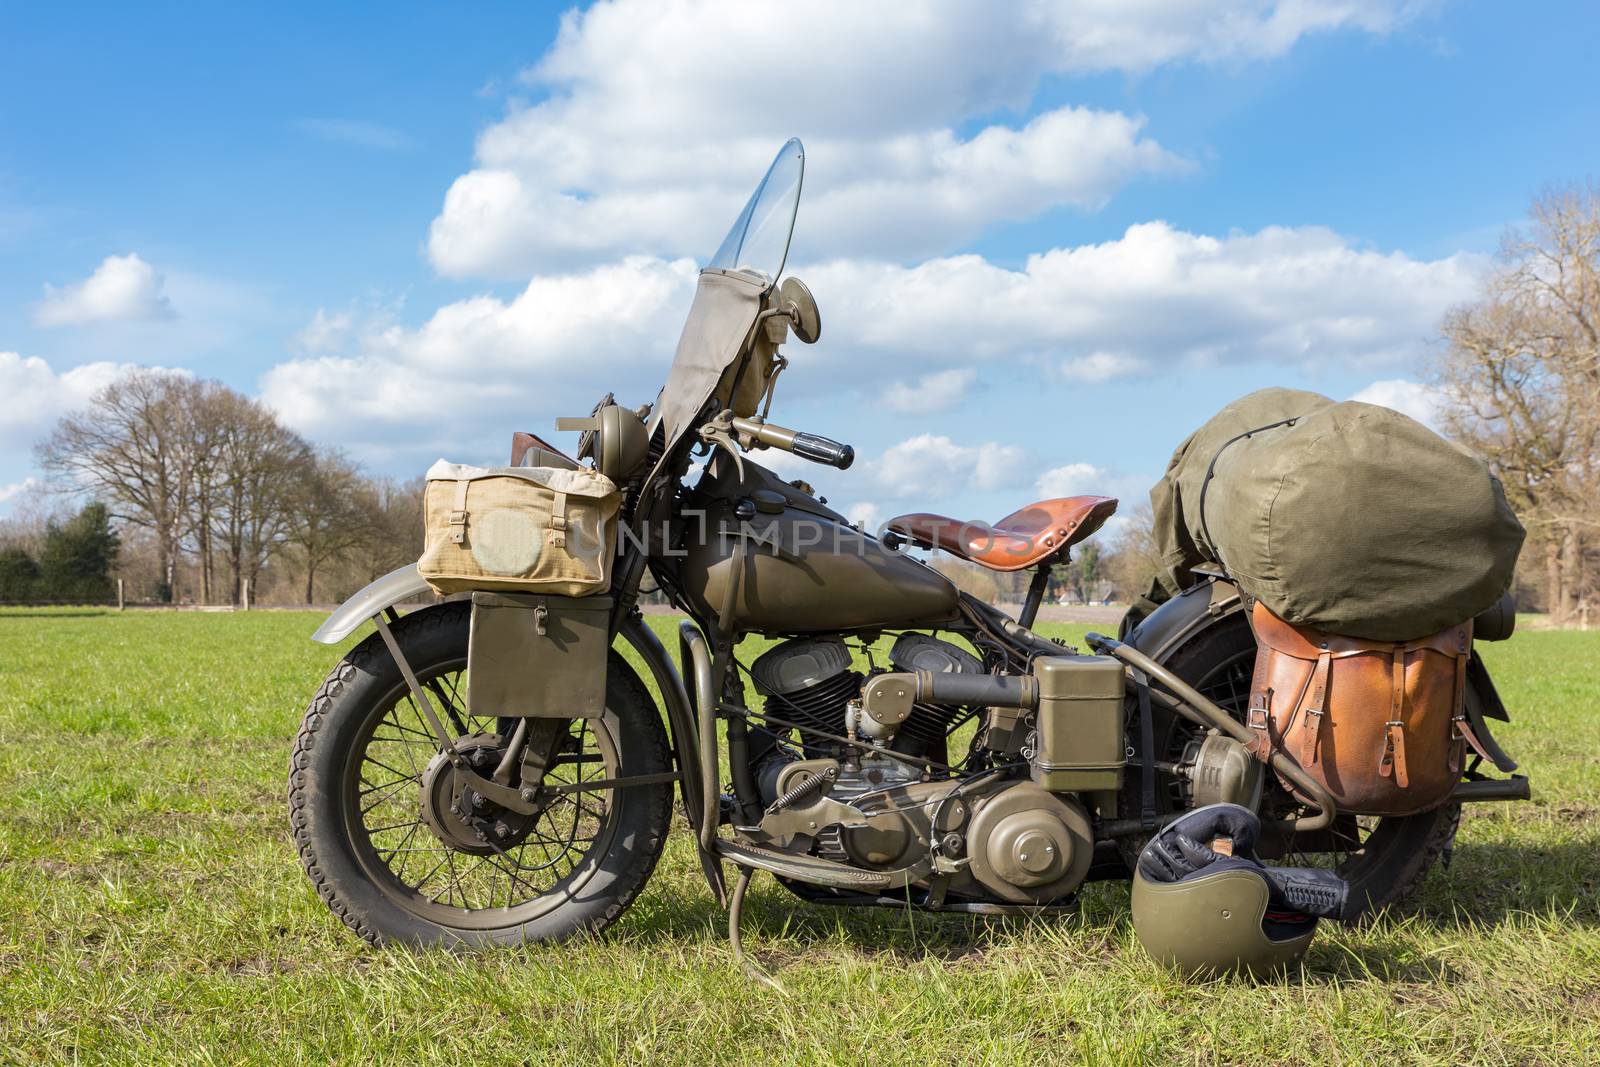 Old american military motorcycle parked on grass for exhibition in nature